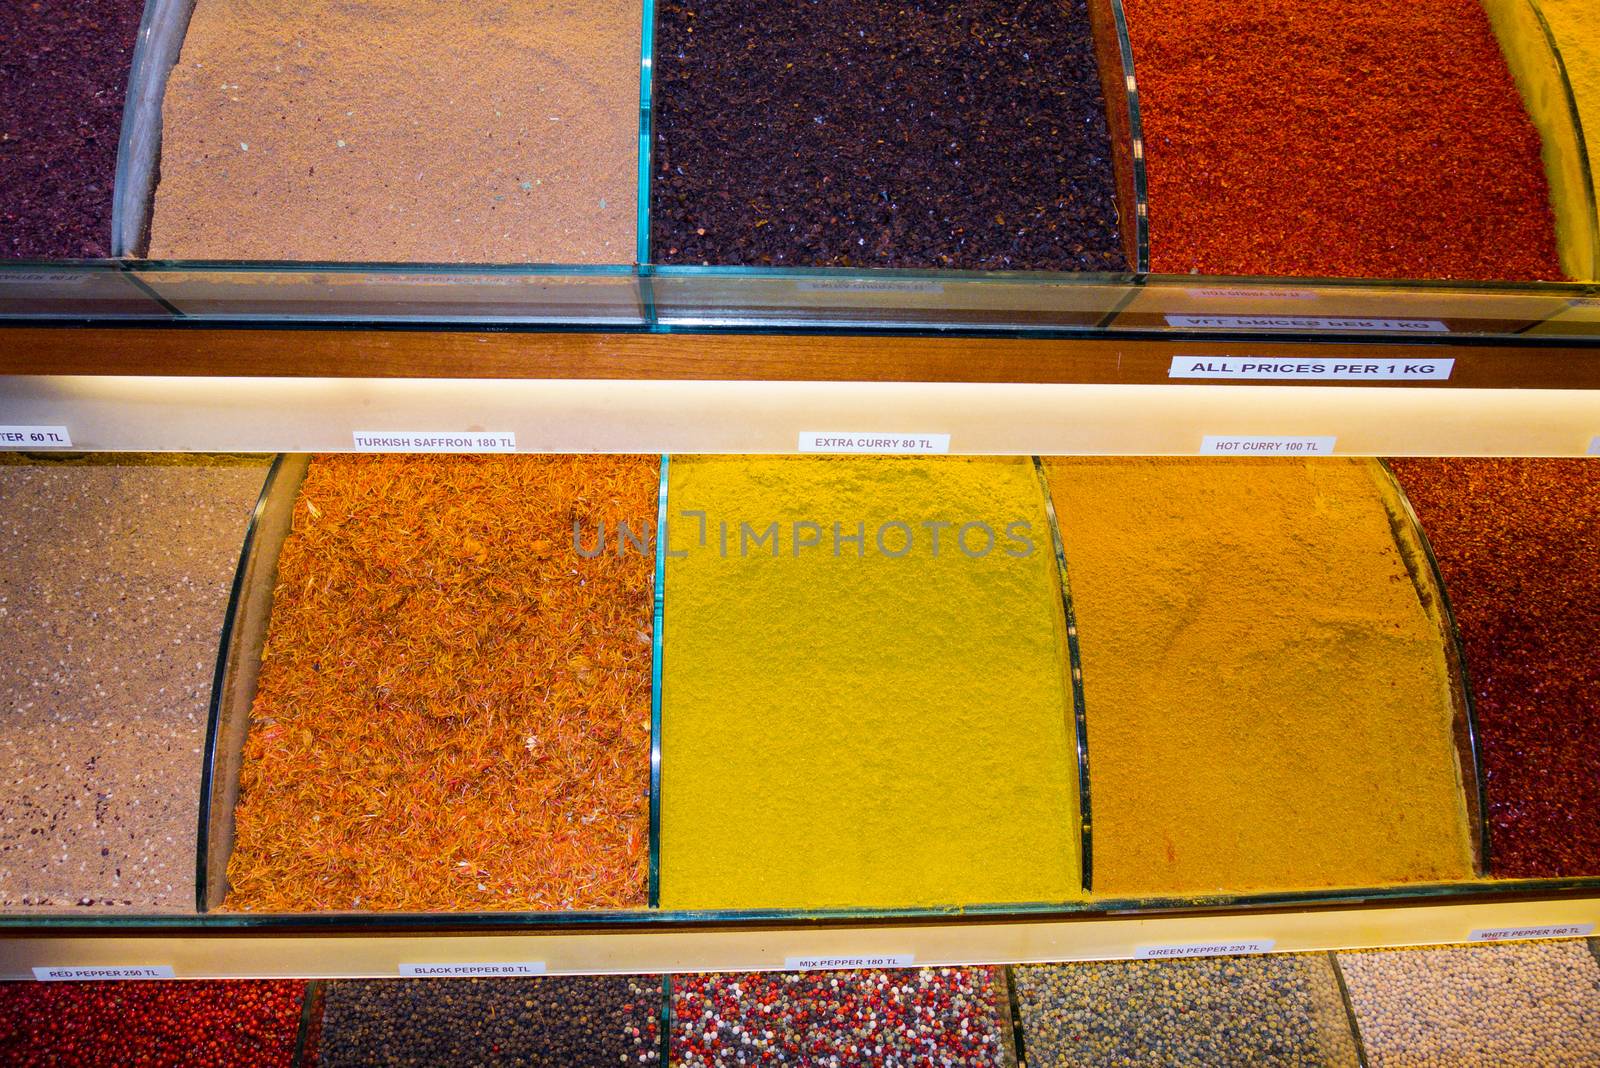 Spices for sale in the Spice market in Istanbul by chrisukphoto